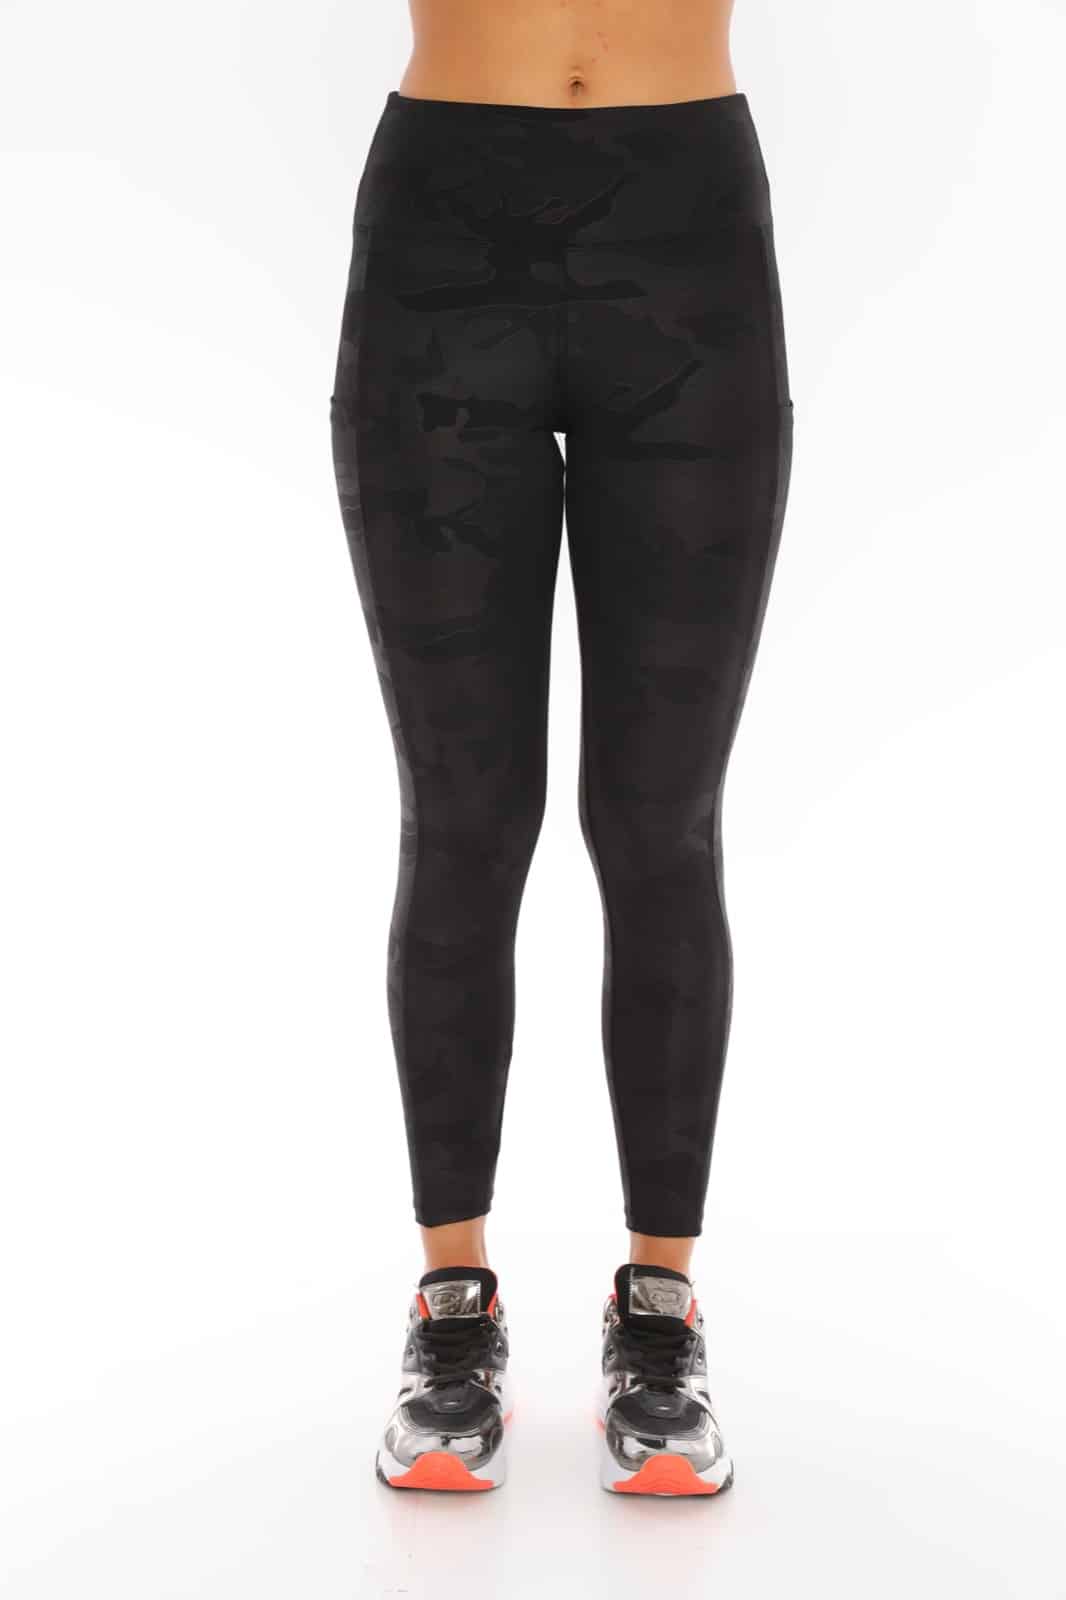 Activewear High Waisted Black Color Camo Design Yoga Pants with Side Pockets  - Its All Leggings